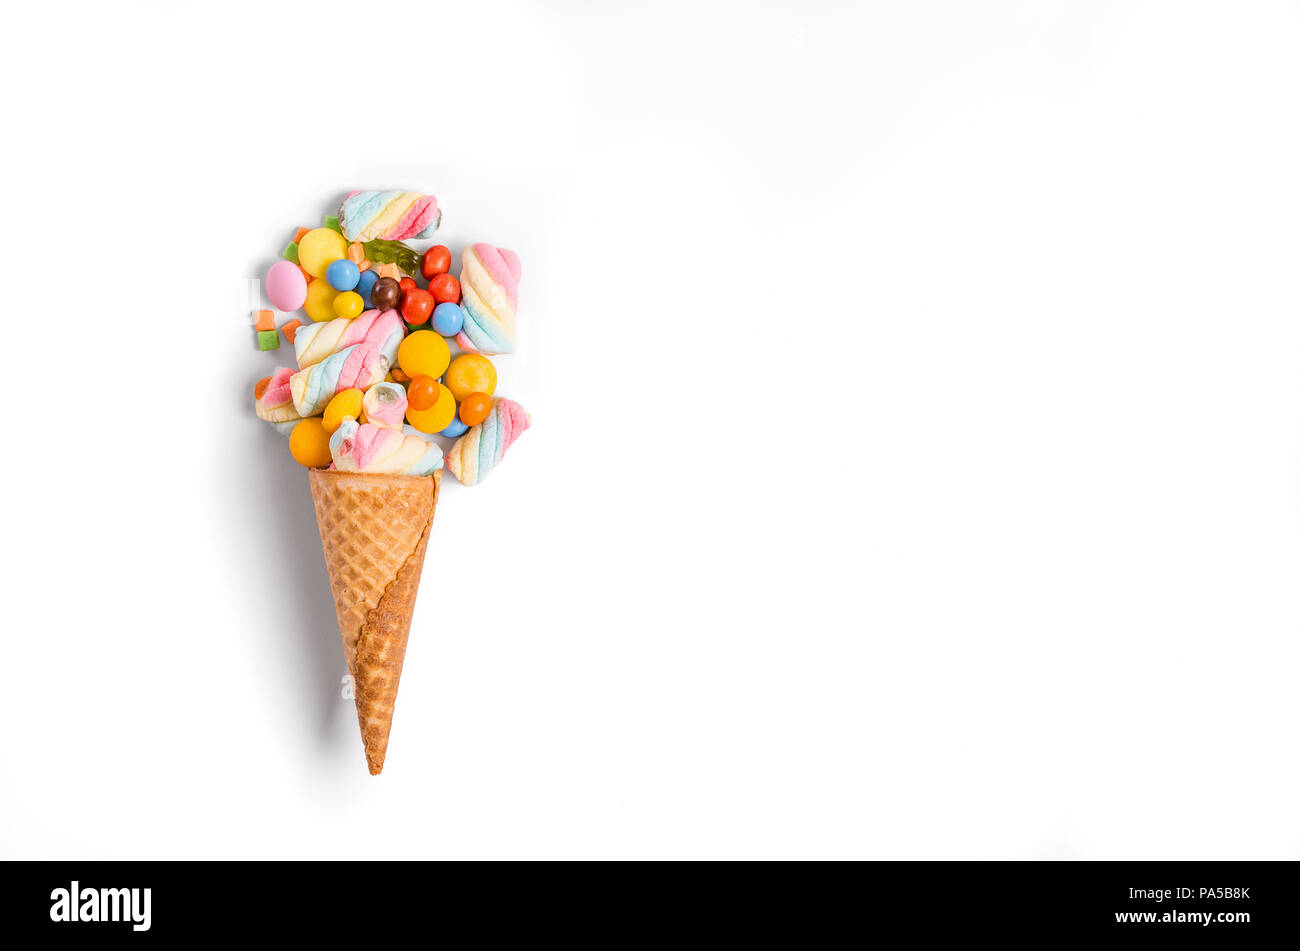 Ice cream cone flat lay image with colorful candy packing into the cone. Stock Photo